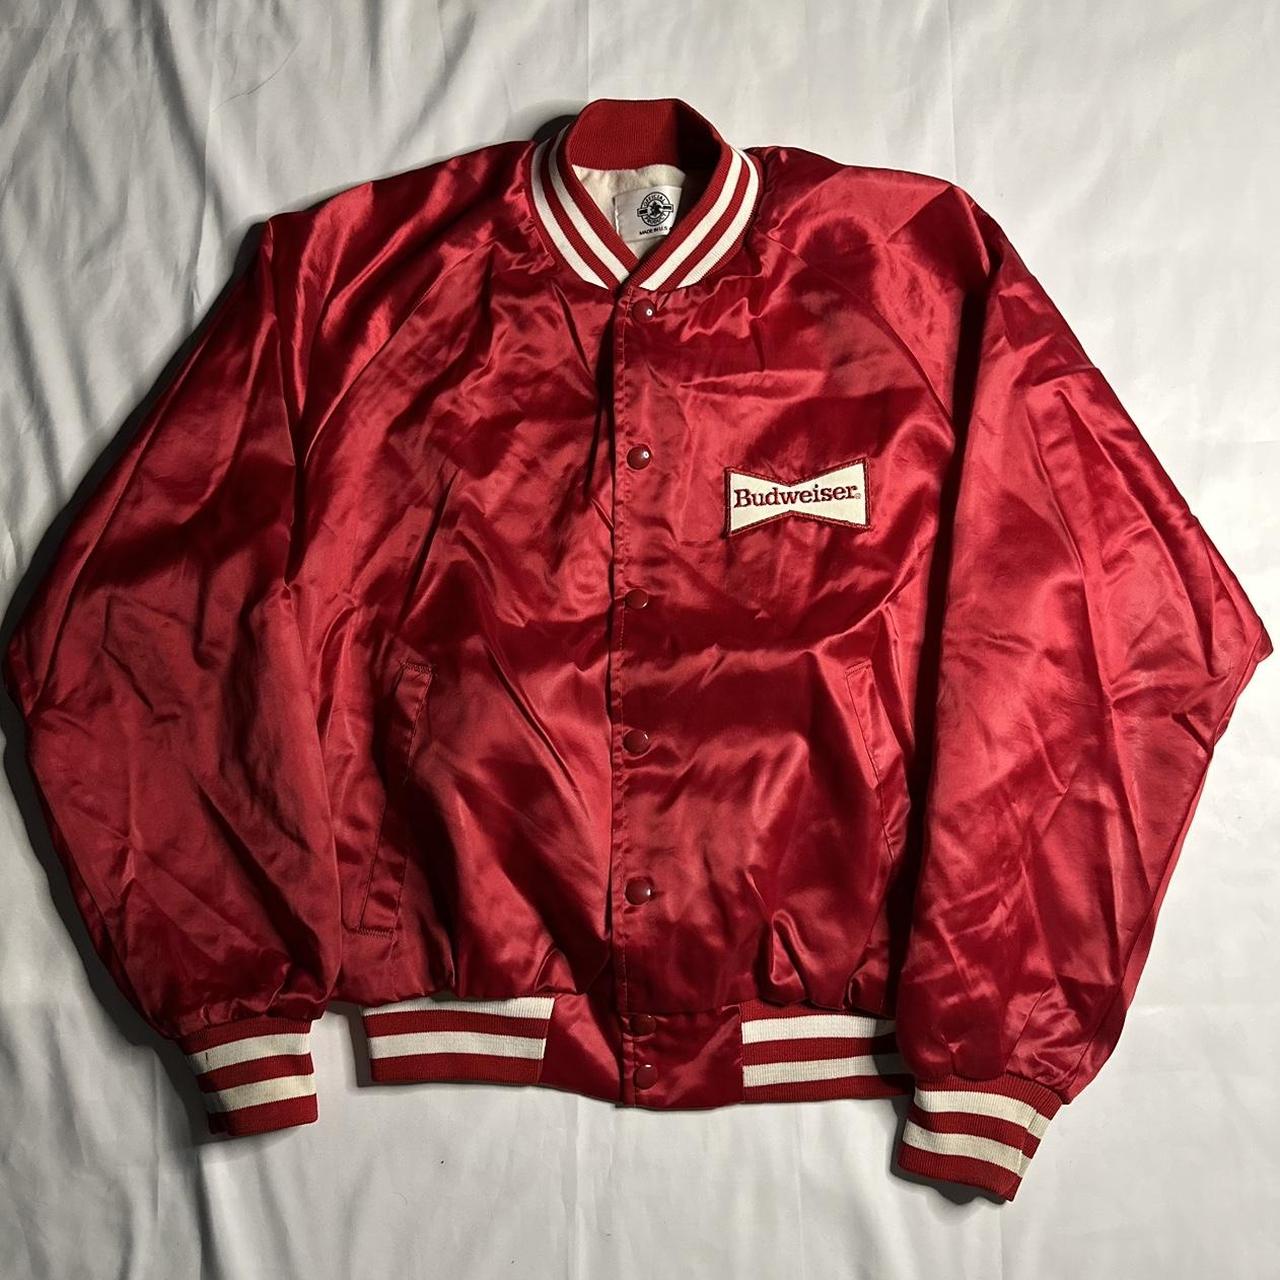 Budweiser Men's Red and White Jacket | Depop